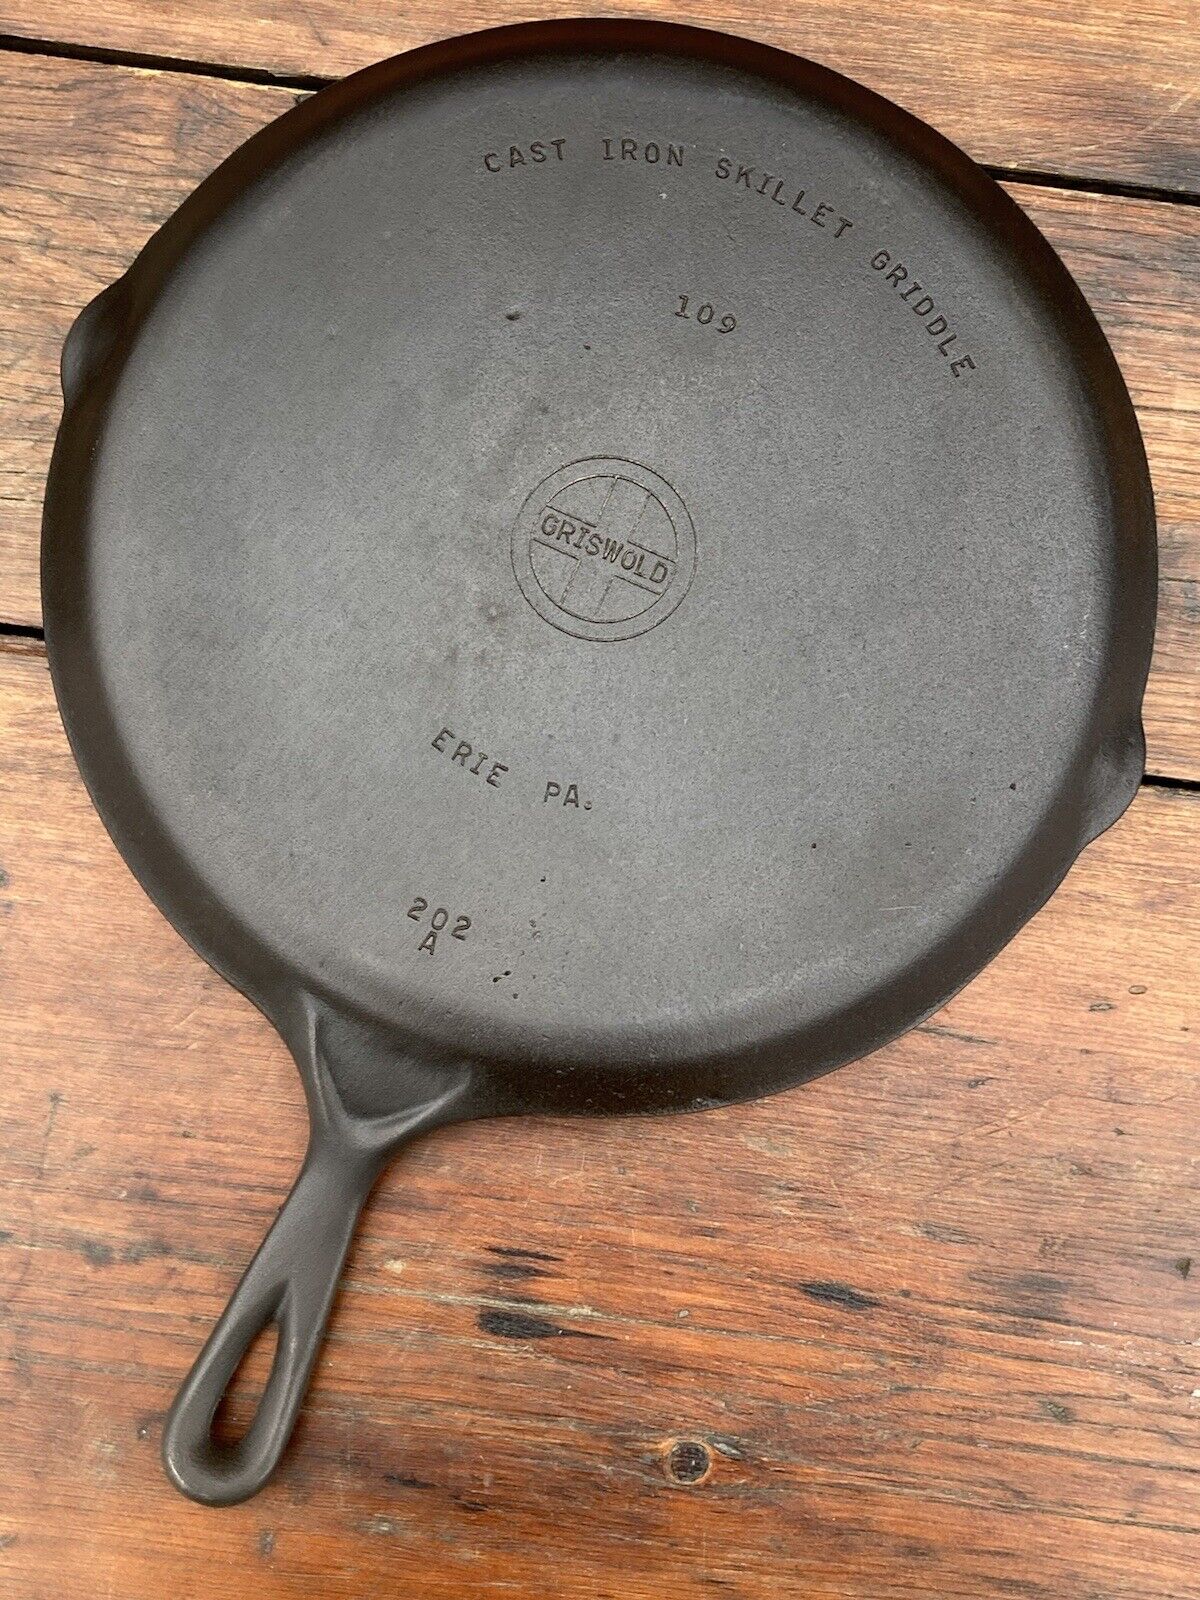 Griswold Cast Iron Small Logo 109 Skillet Griddle